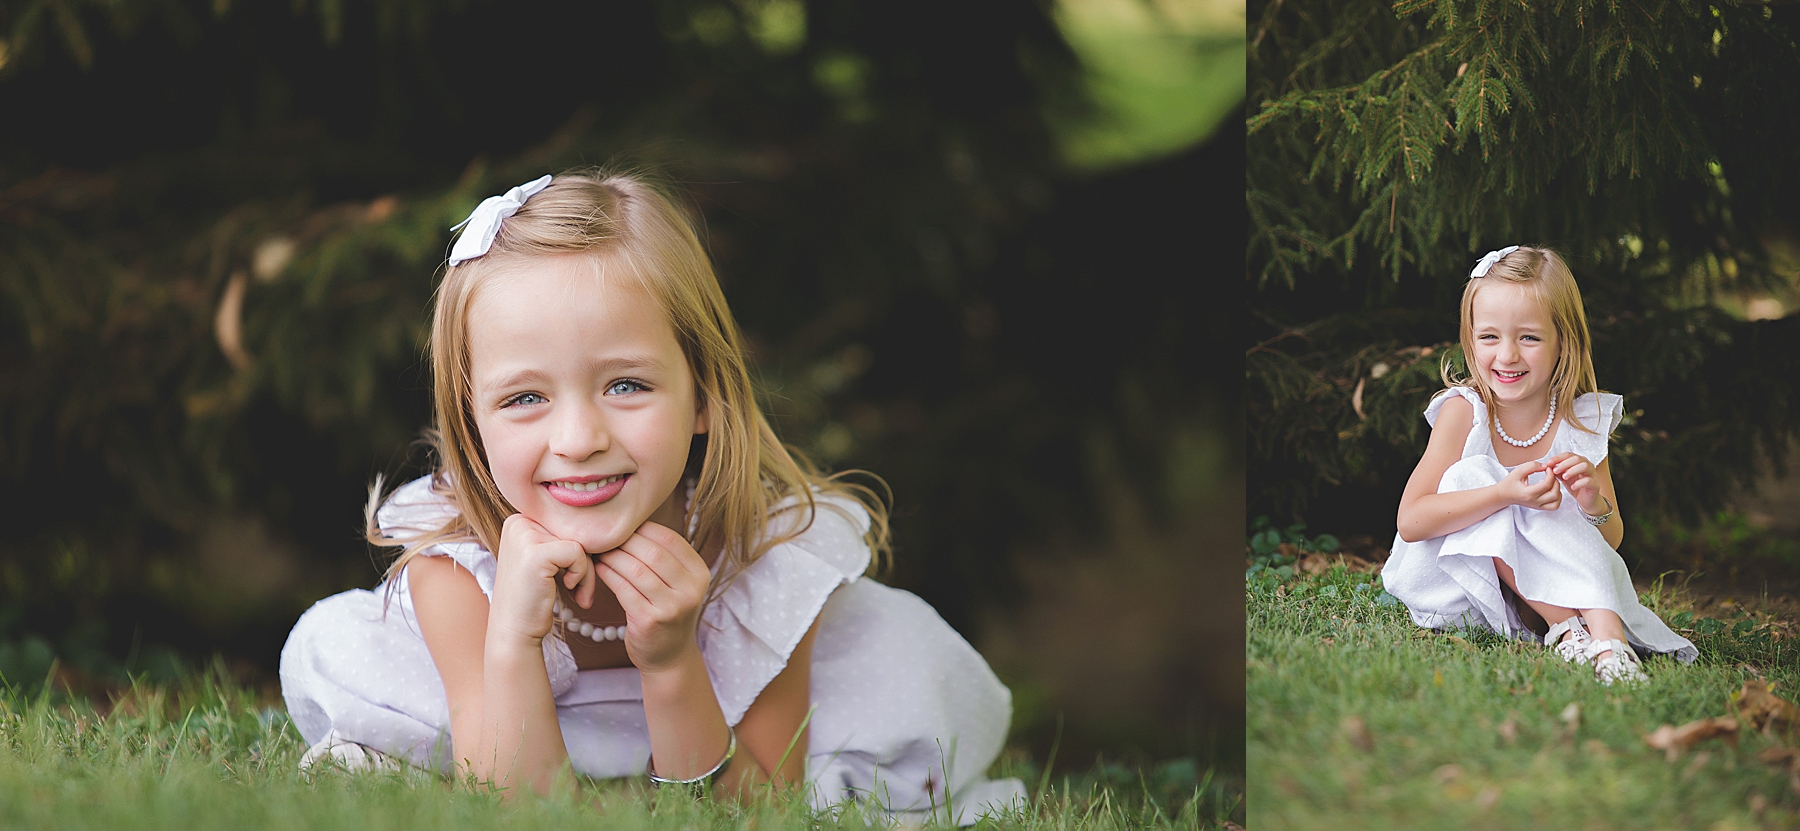 photos of little girl in the shade of a tree how to take good pictures kristina rose photography